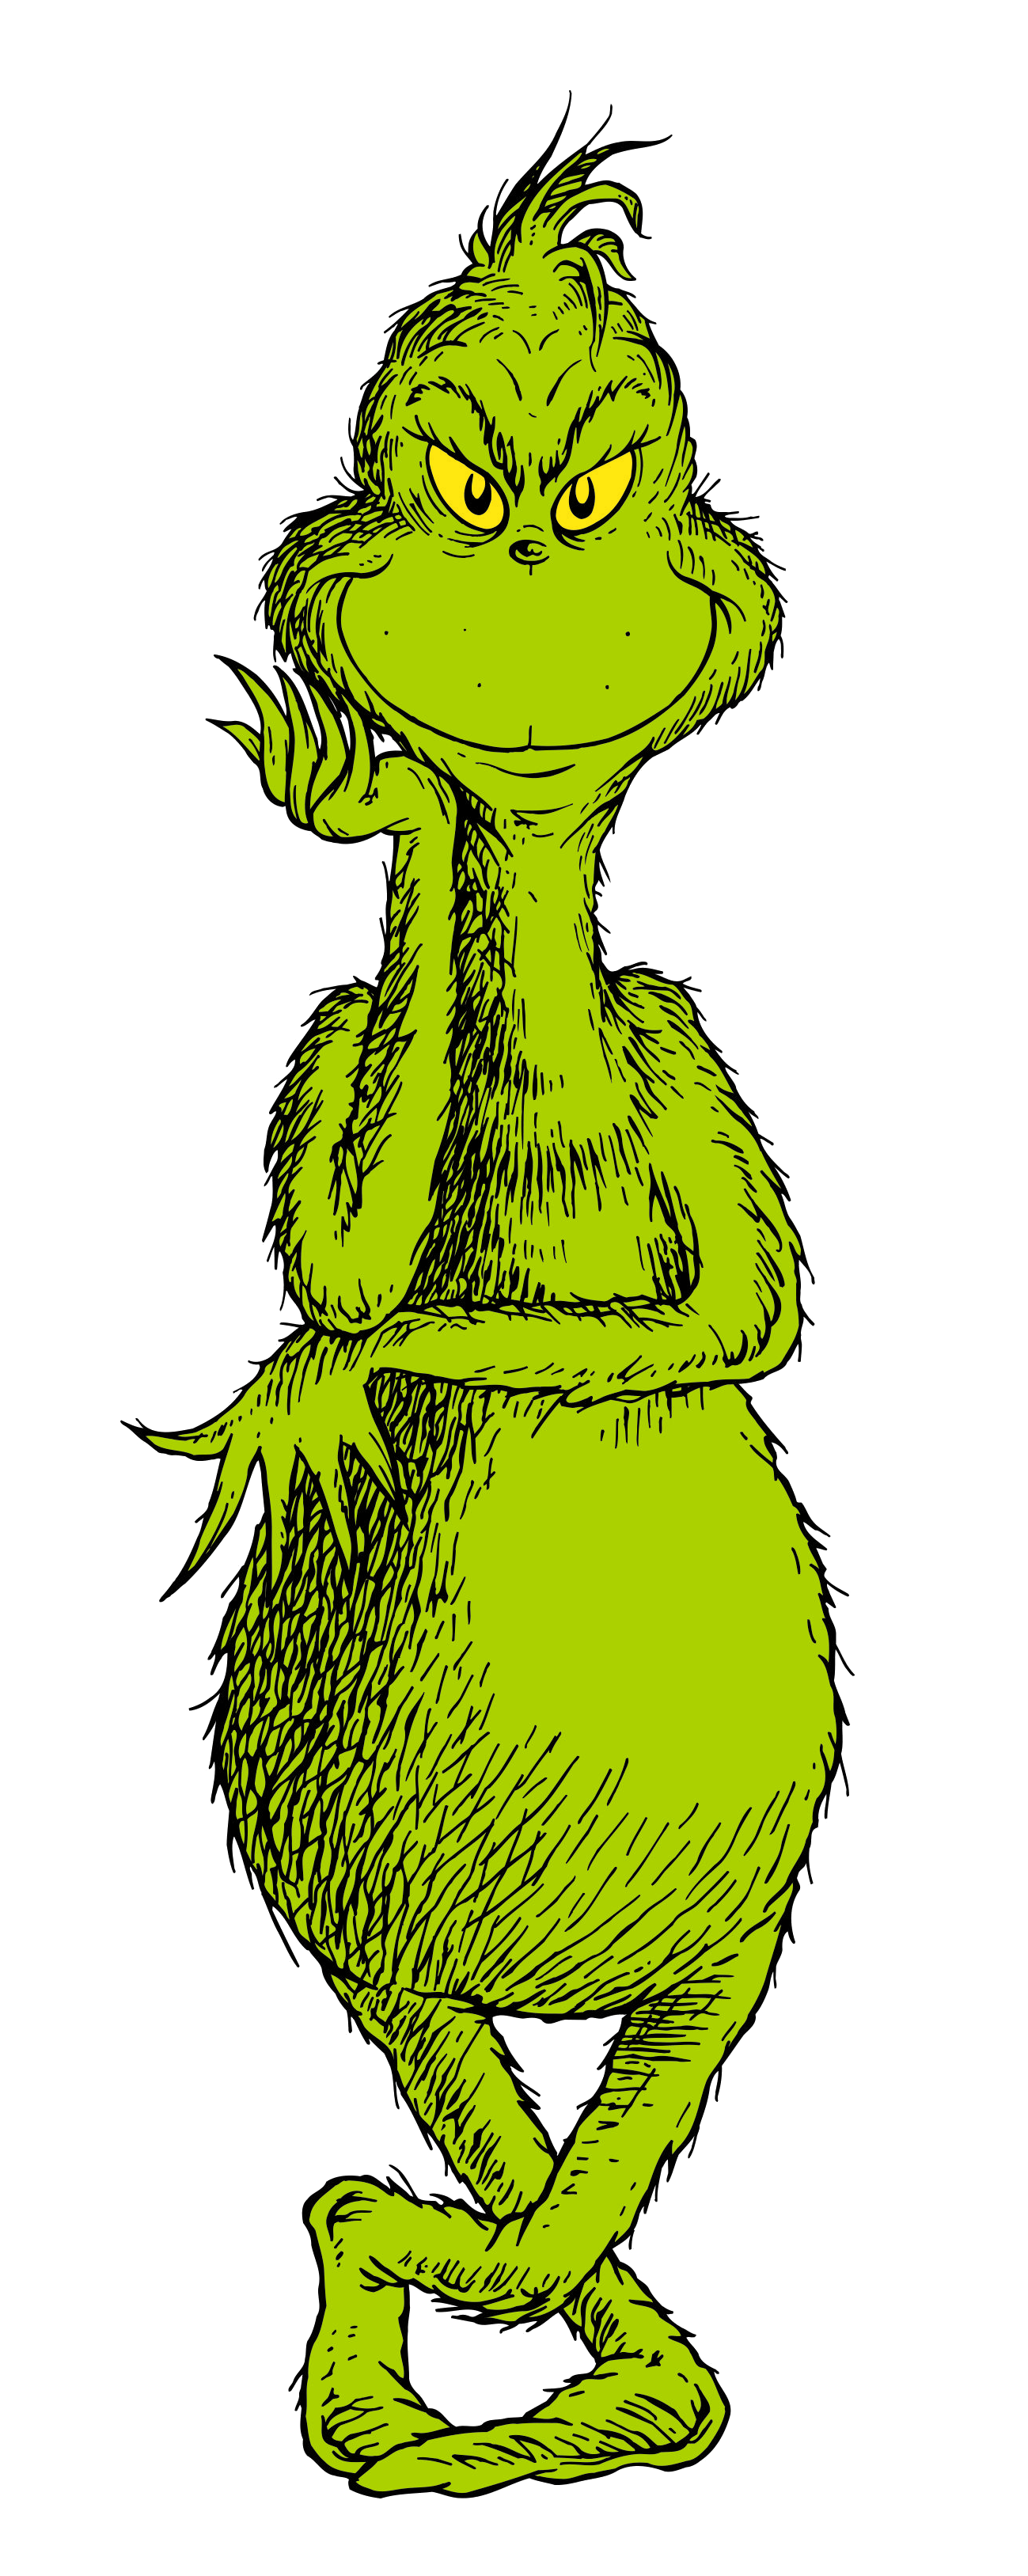 image of the original Grinch from Dr. Seuss' "How the Grinch Stole Christmas"